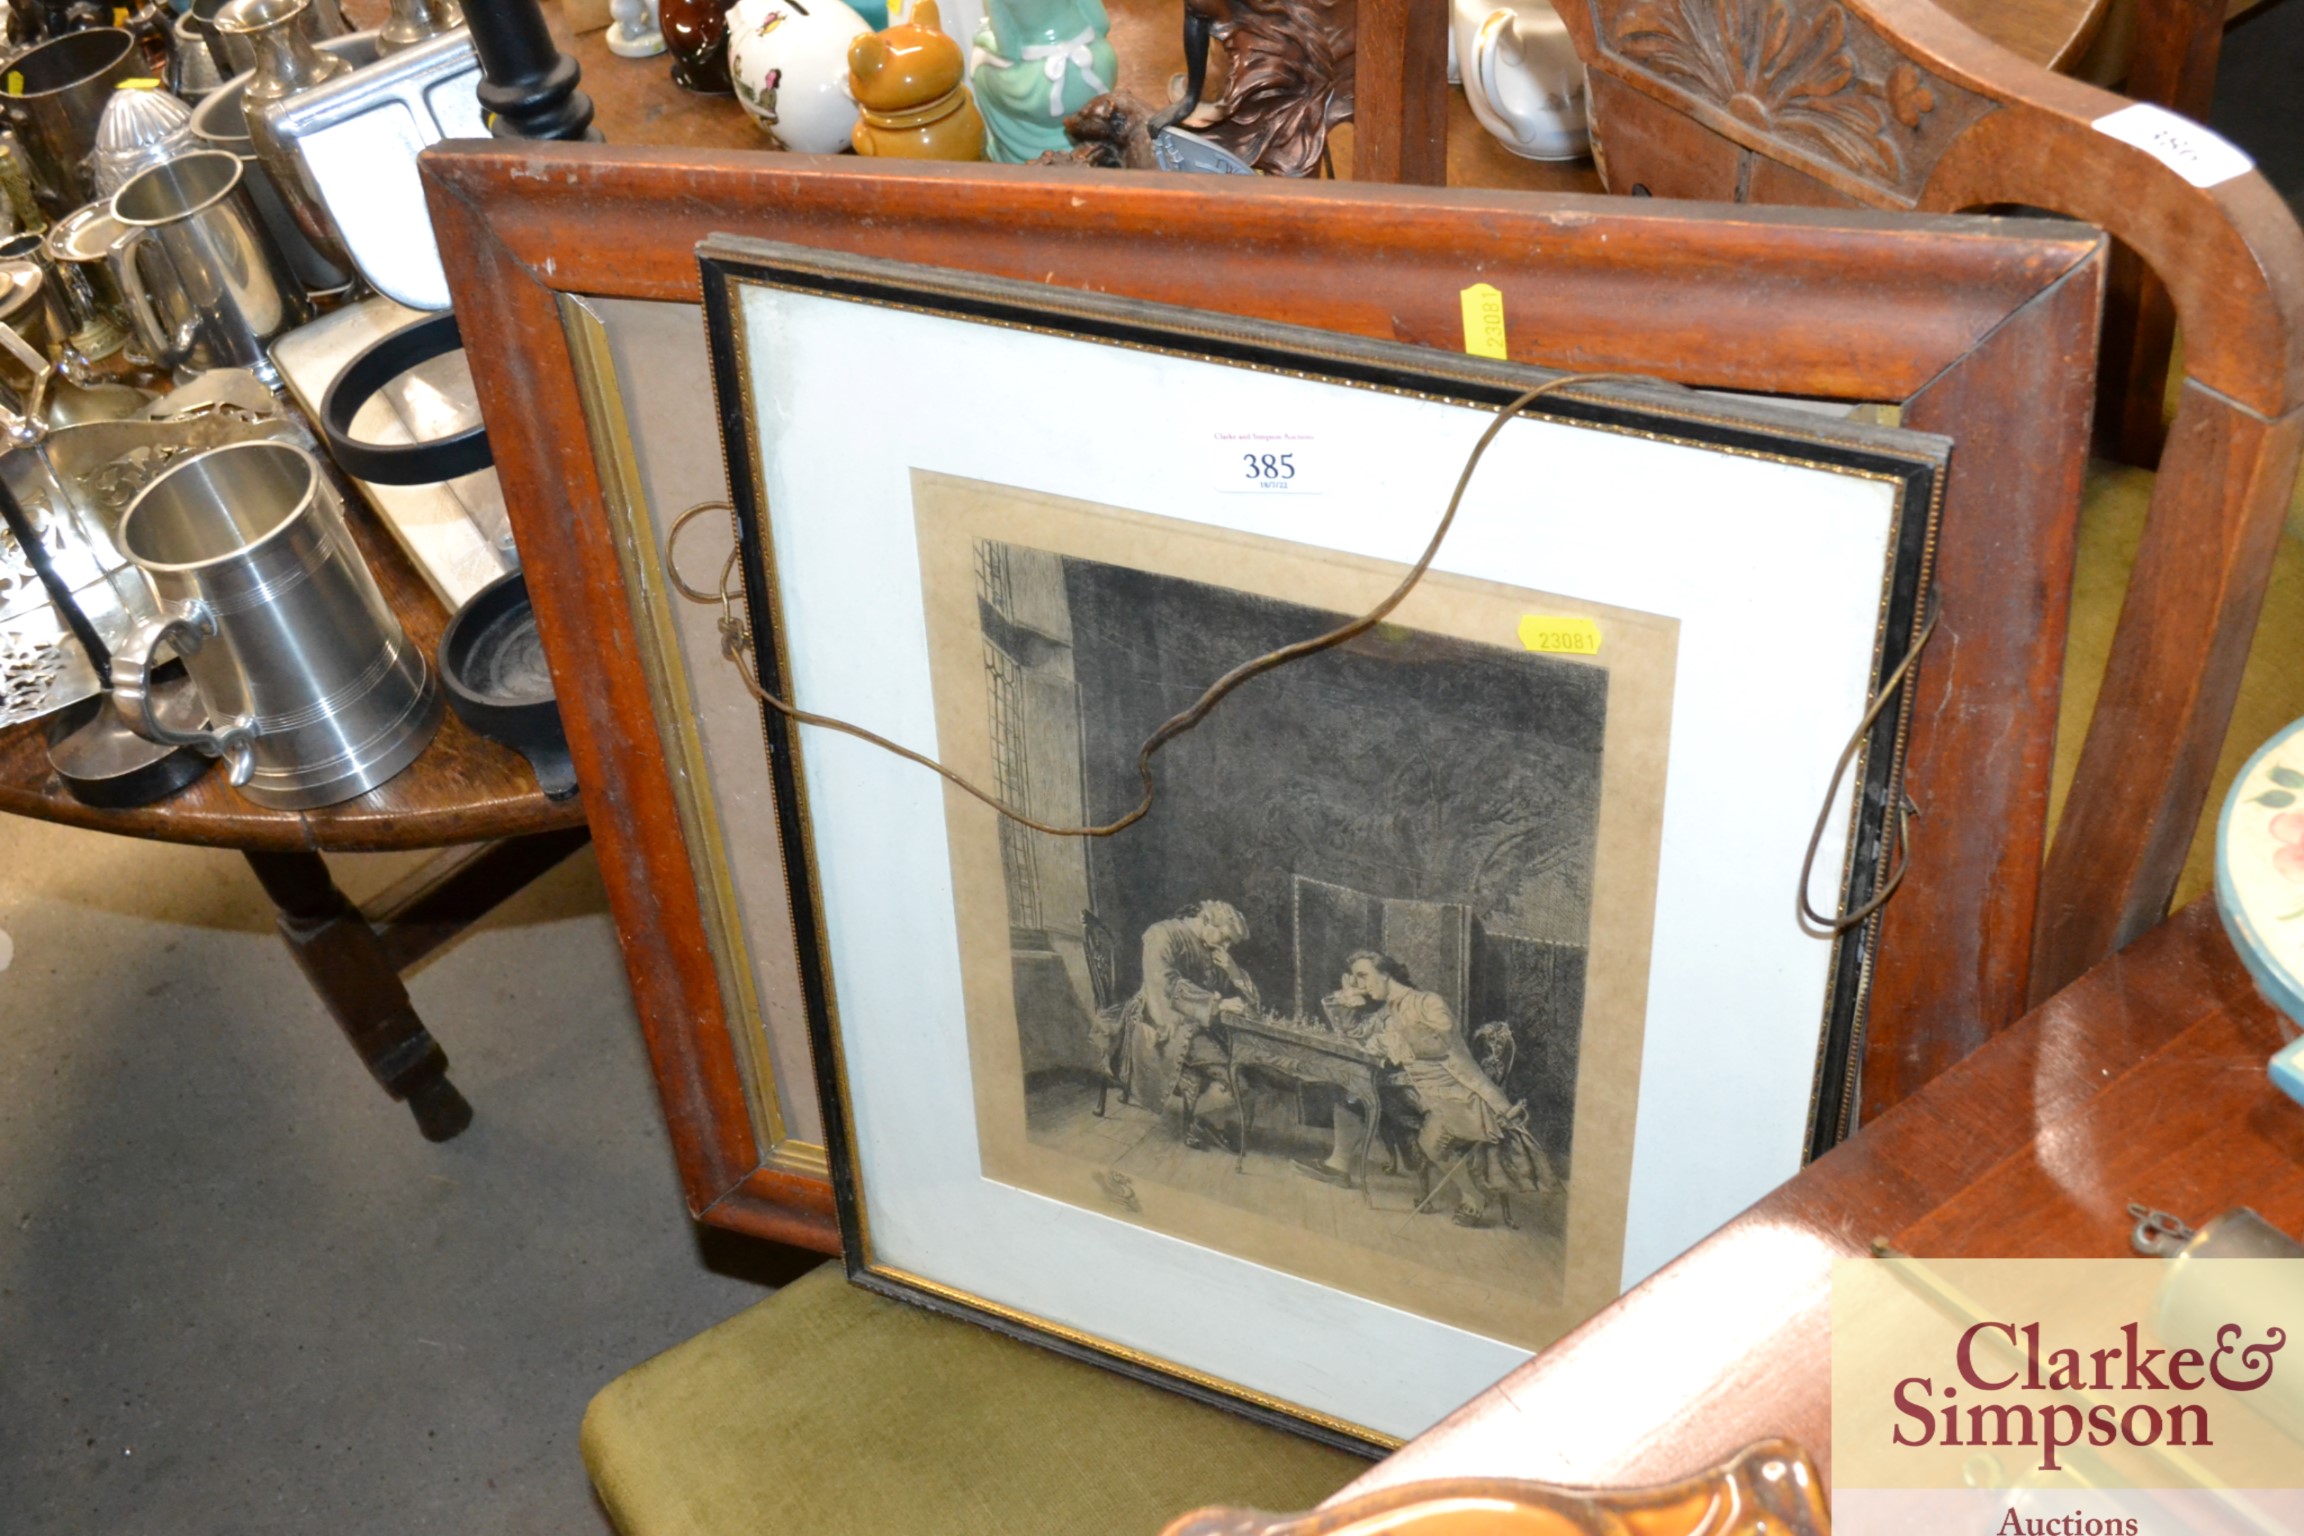 A maple framed vintage photograph; and a print of